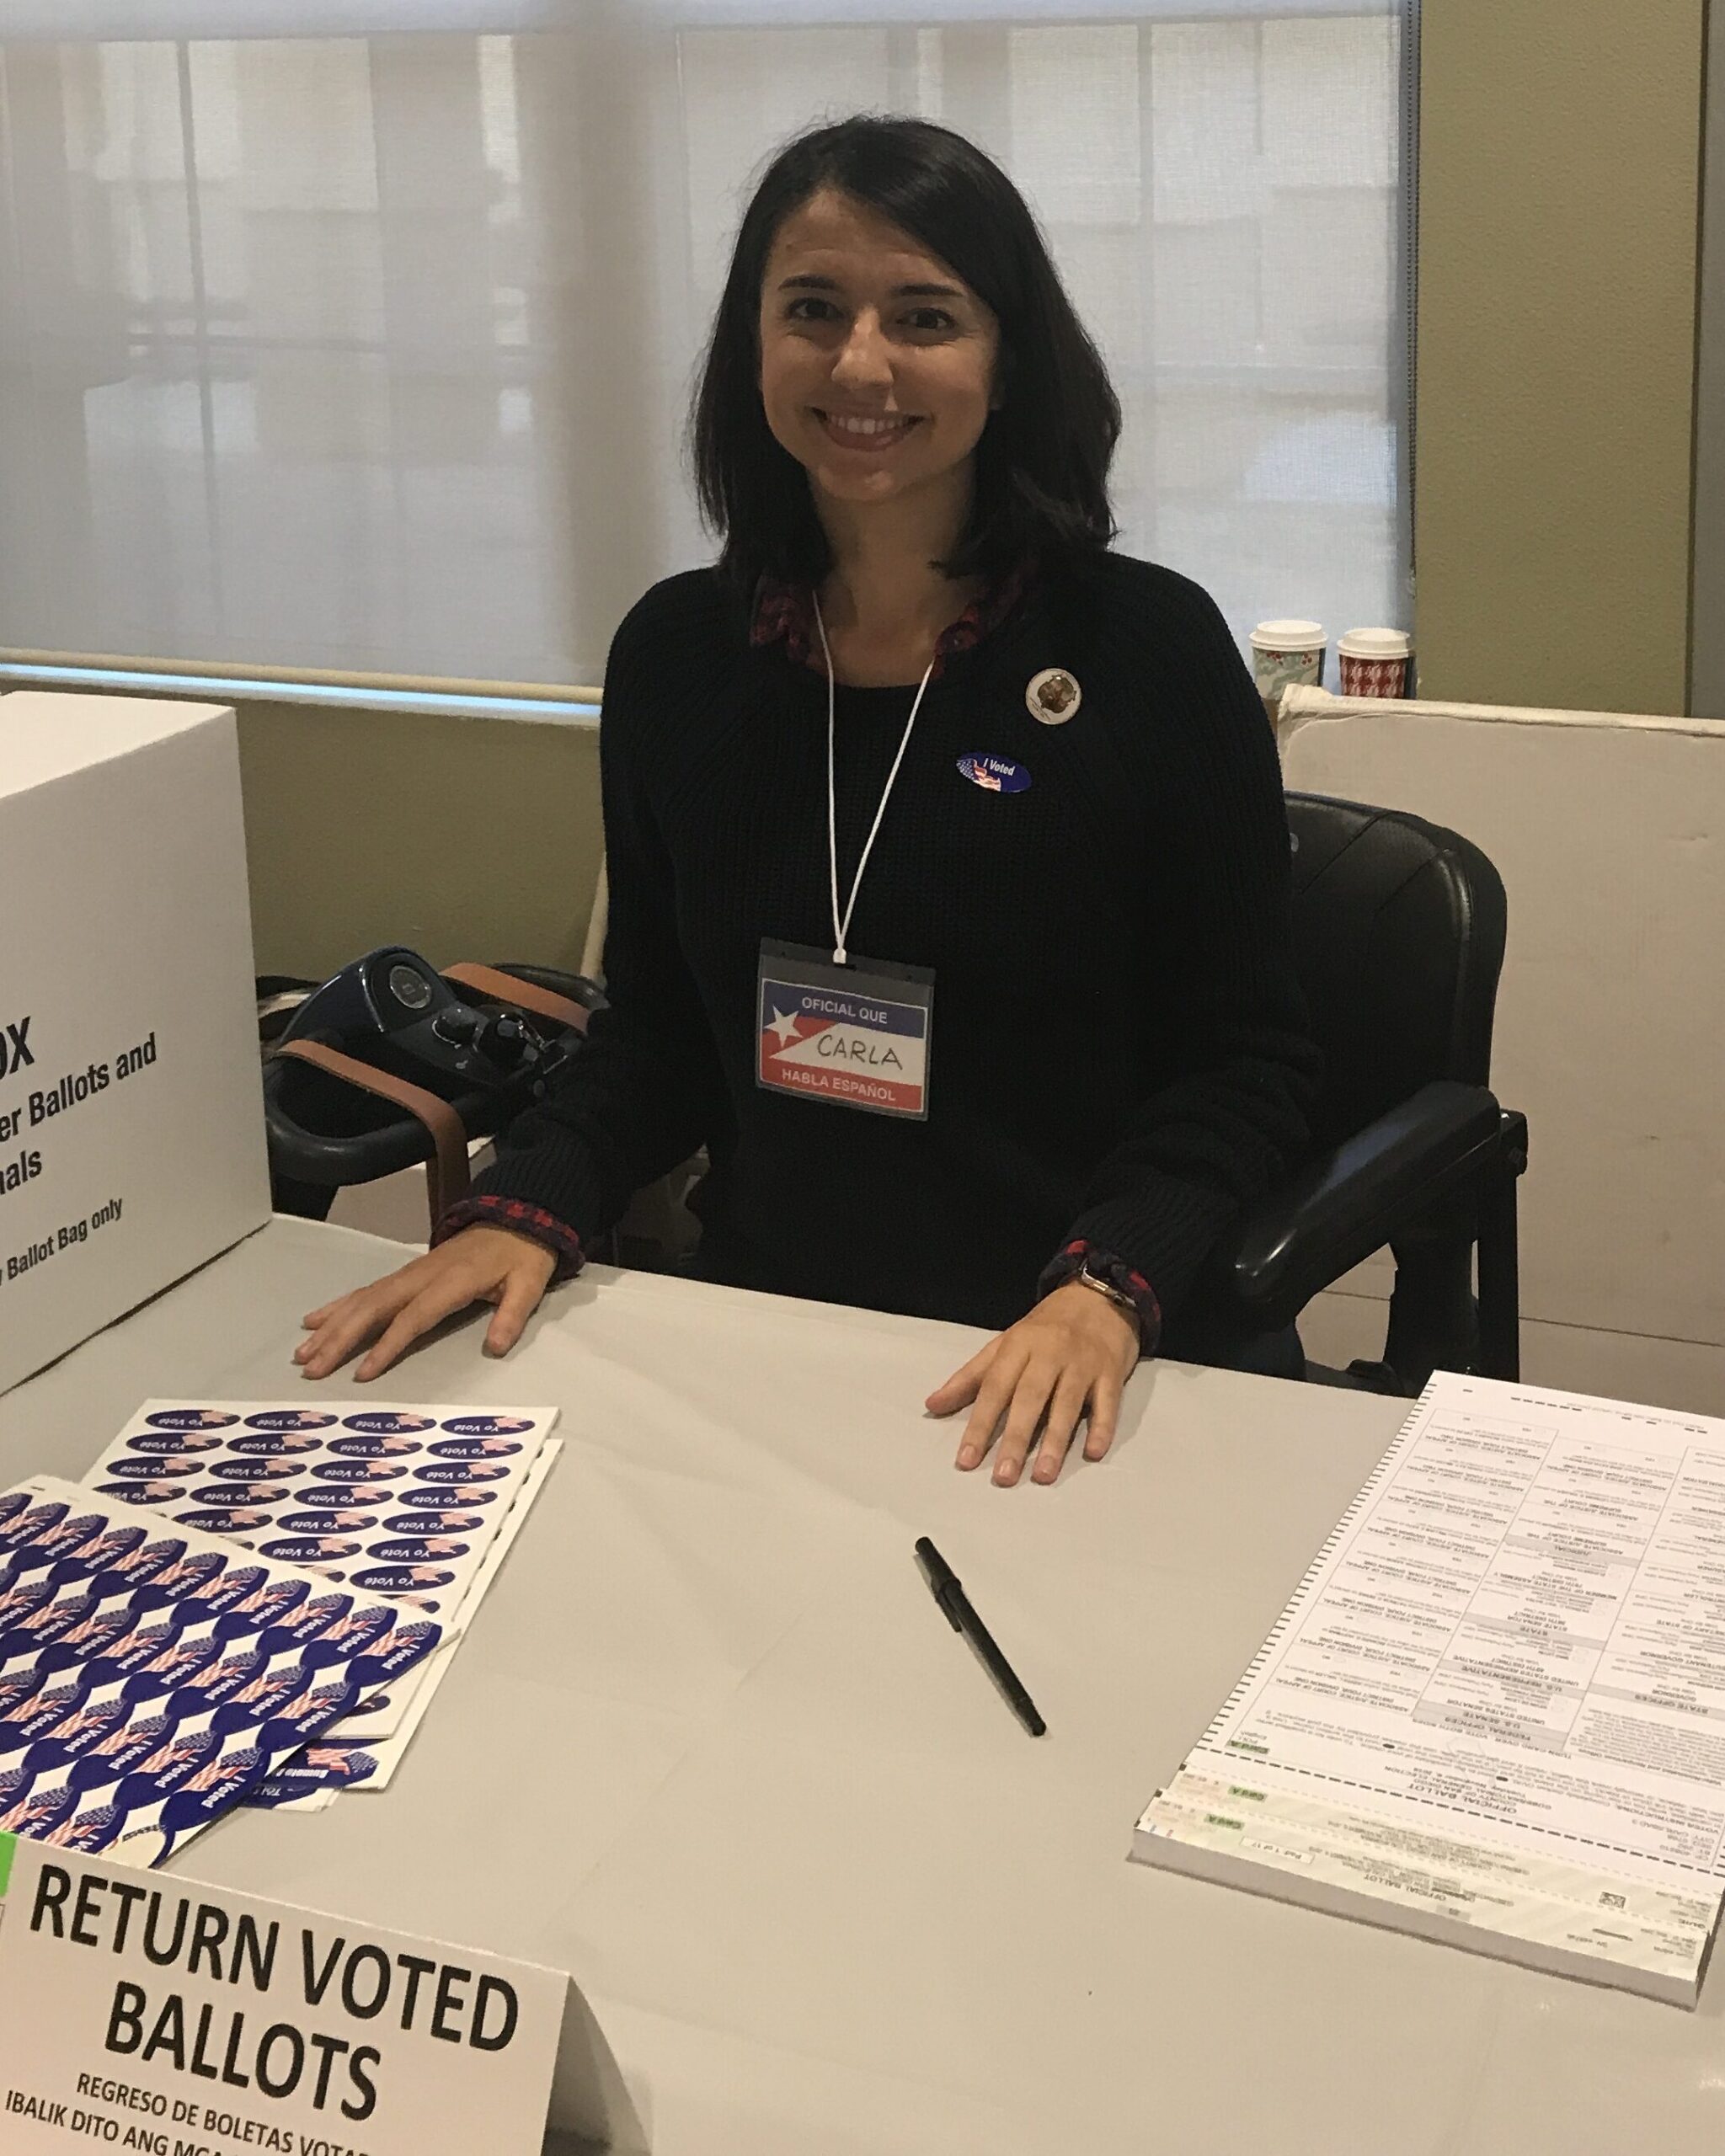 Photo of a volunteer named Carla S. from California sitting at a table working as a poll worker